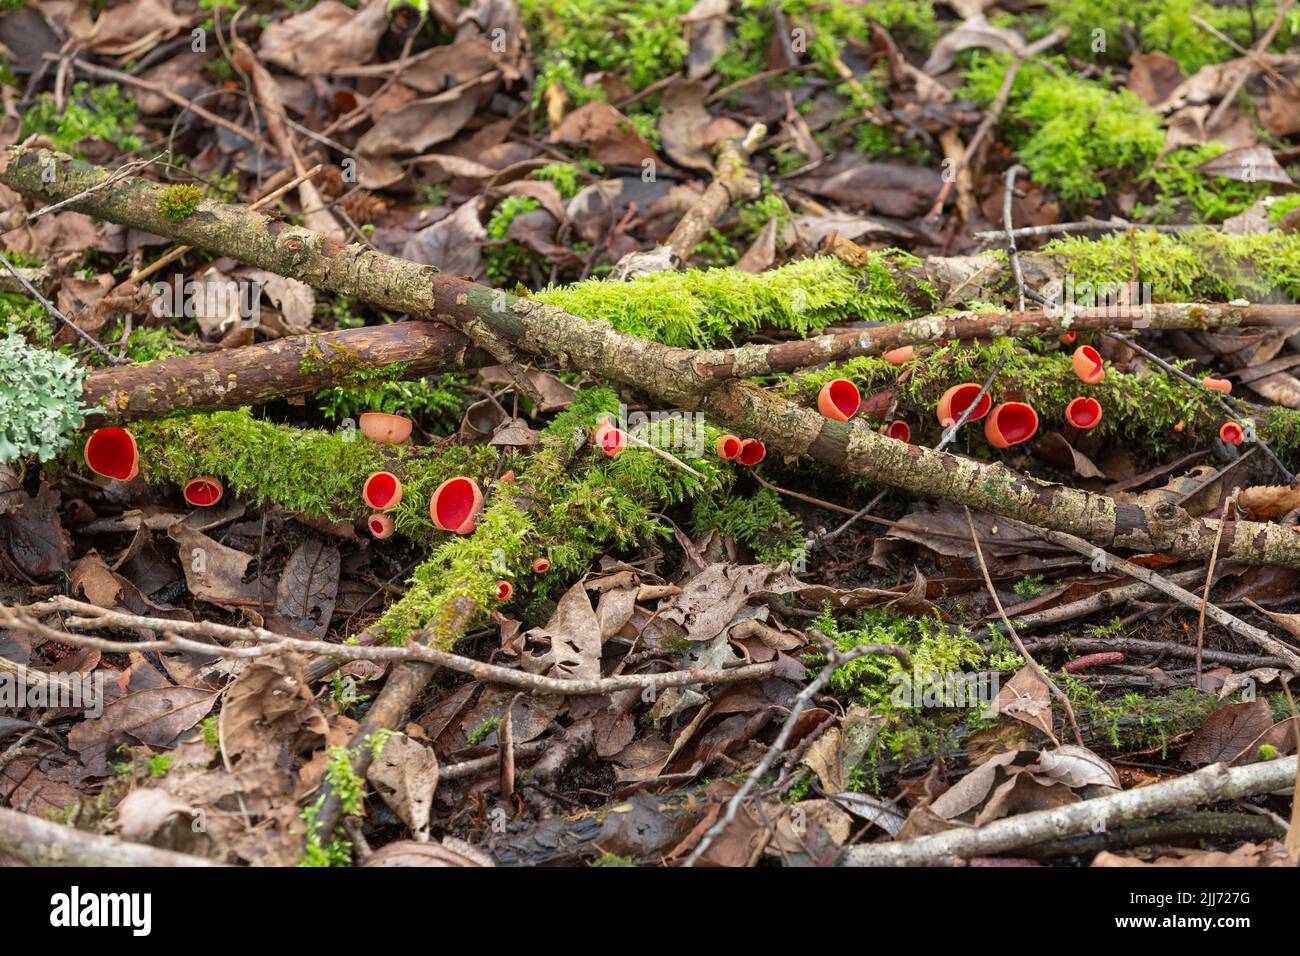 Scarlet elf cup Sarcoscypha coccinea, fruiting bodies along fallen branches, Shapwich Heath, Somerset, UK, February Stock Photo